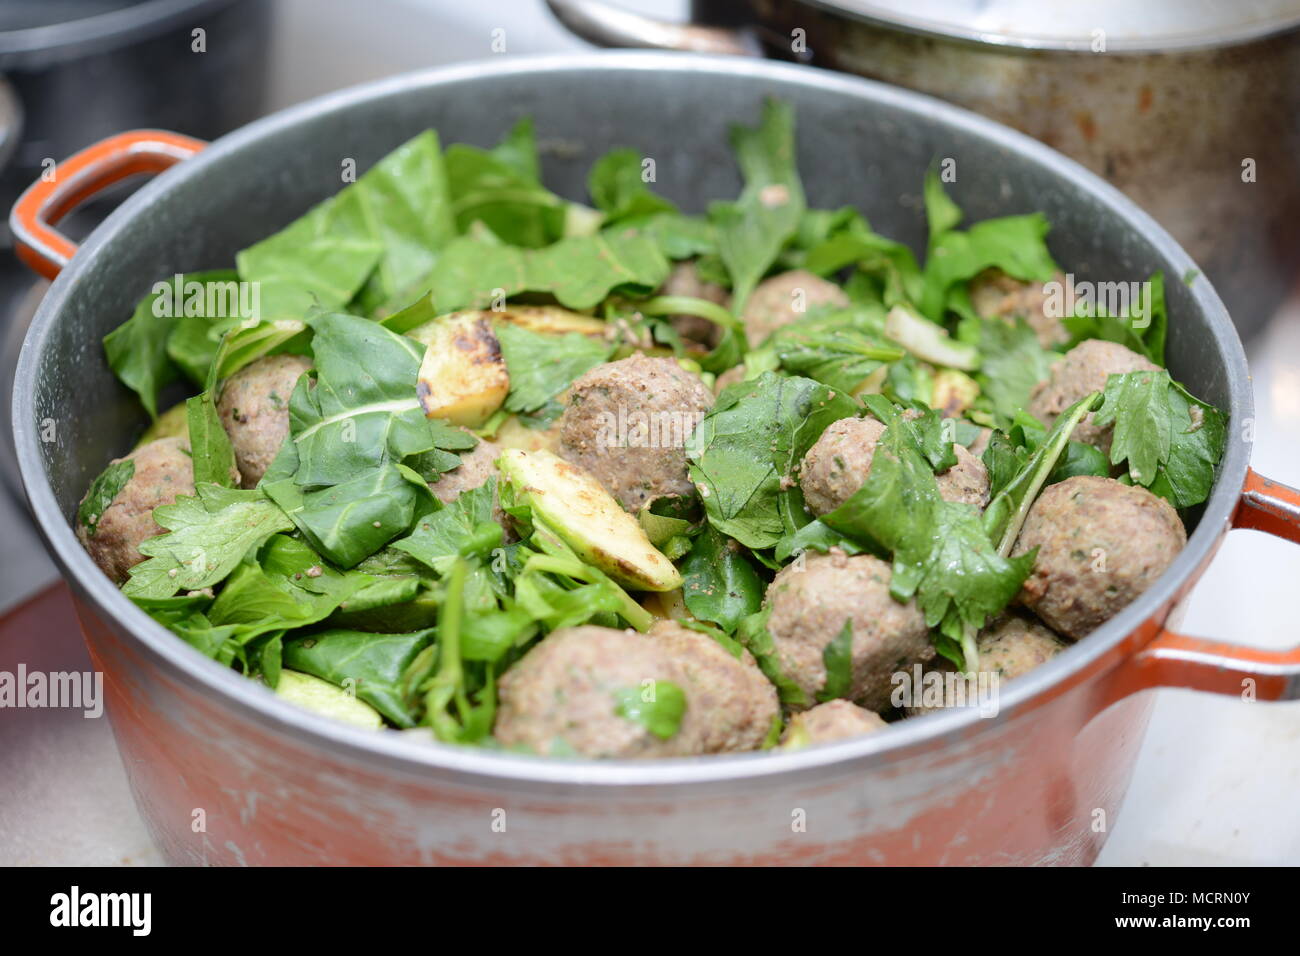 Cooking meatballs - Meatballs cook in a pot Stock Photo